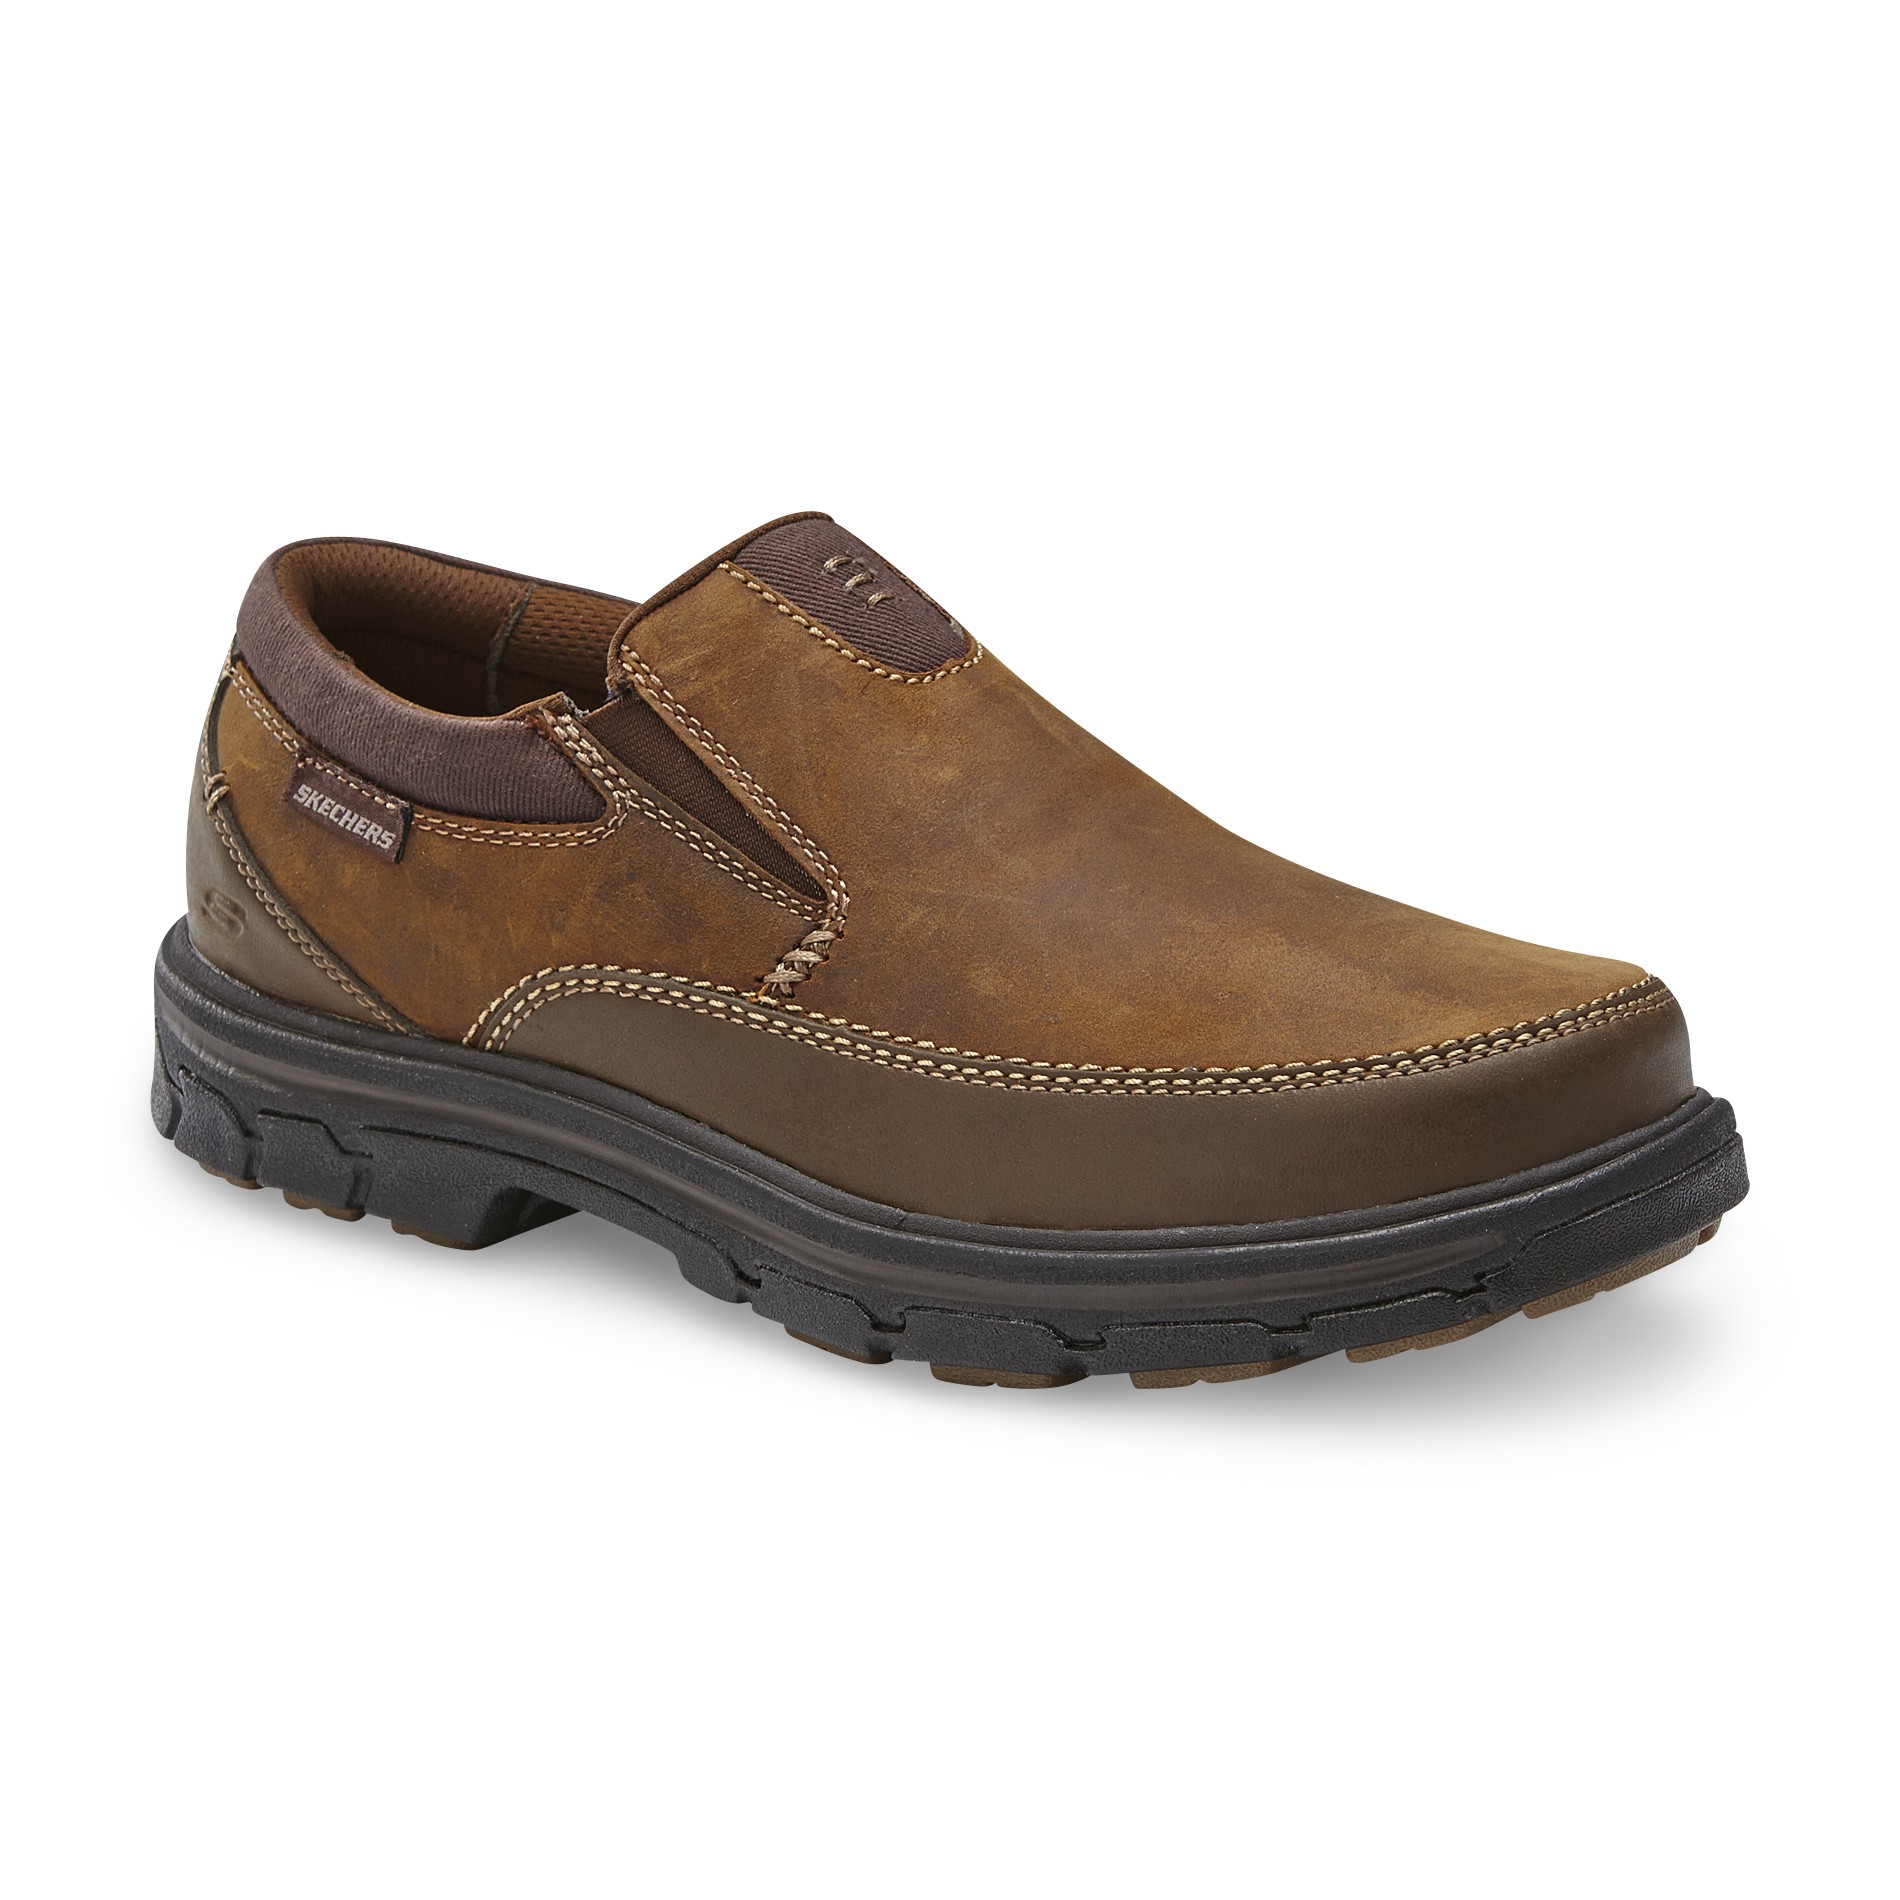 Skechers Men's The Search Relaxed Fit Leather Loafer - Brown